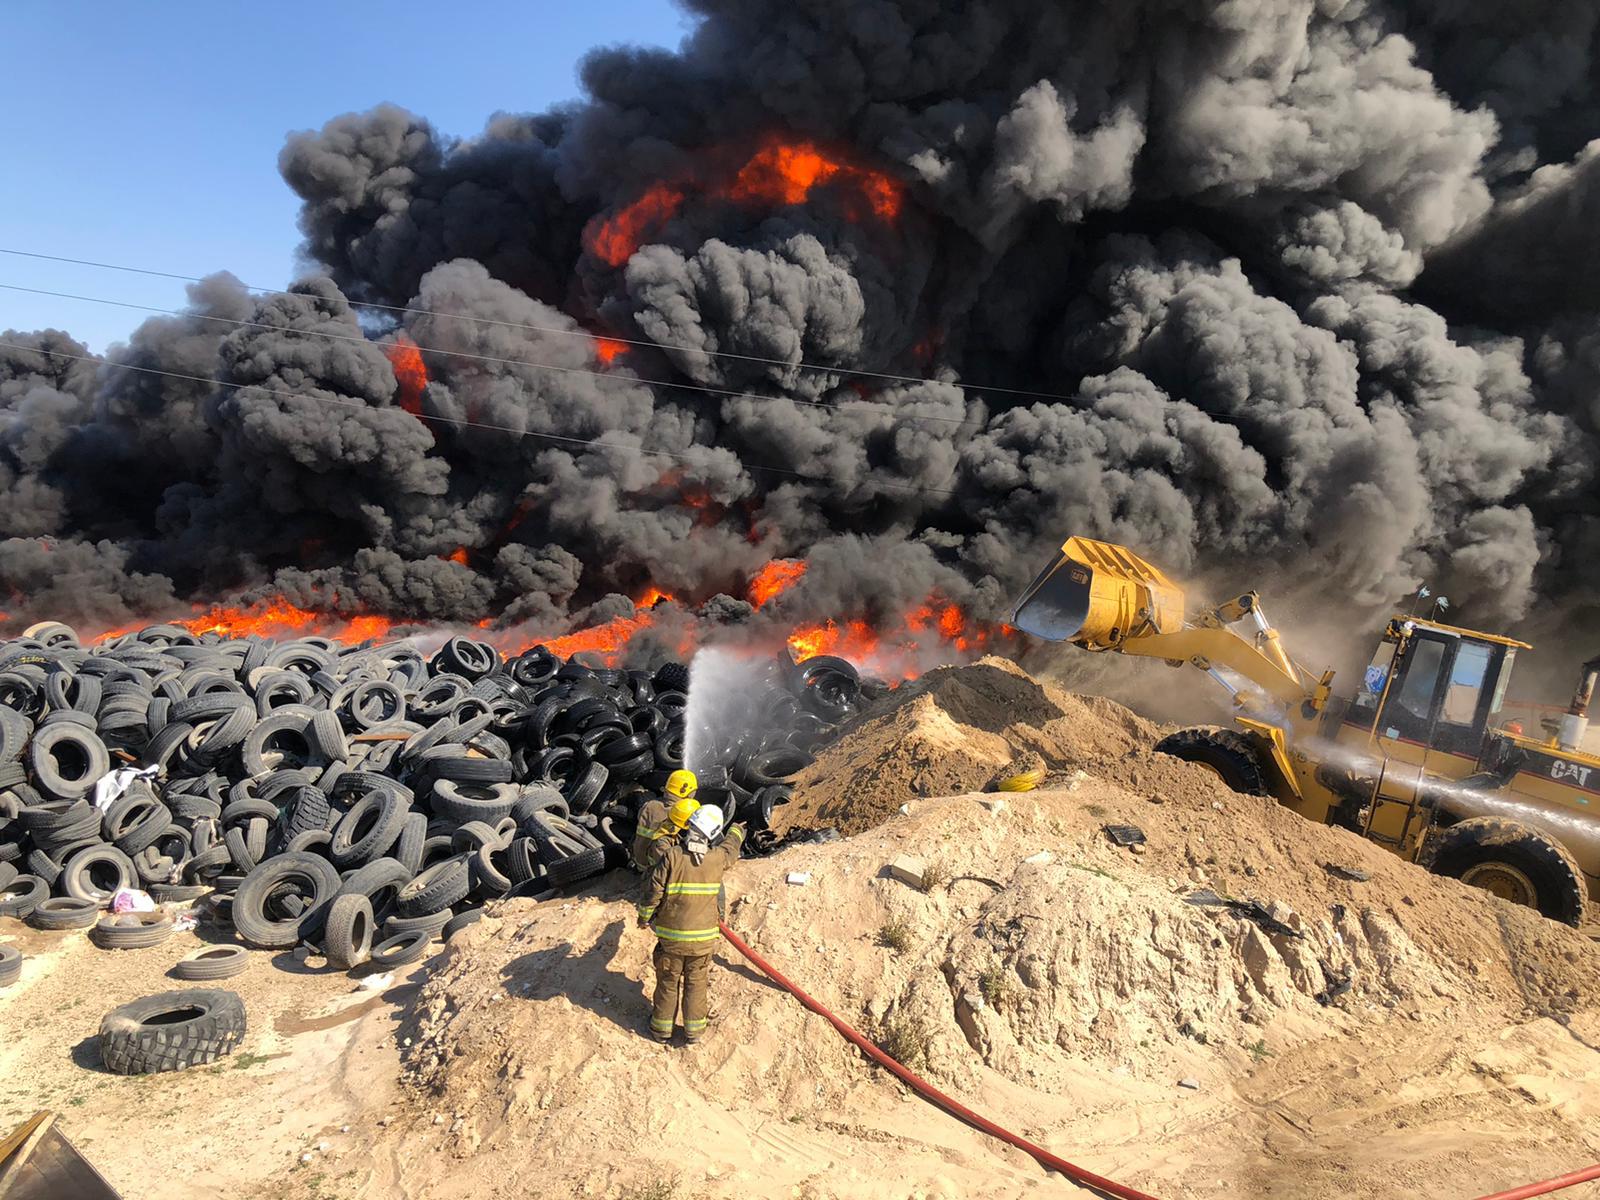 Firefighters control blaze at tire yard in Jahra